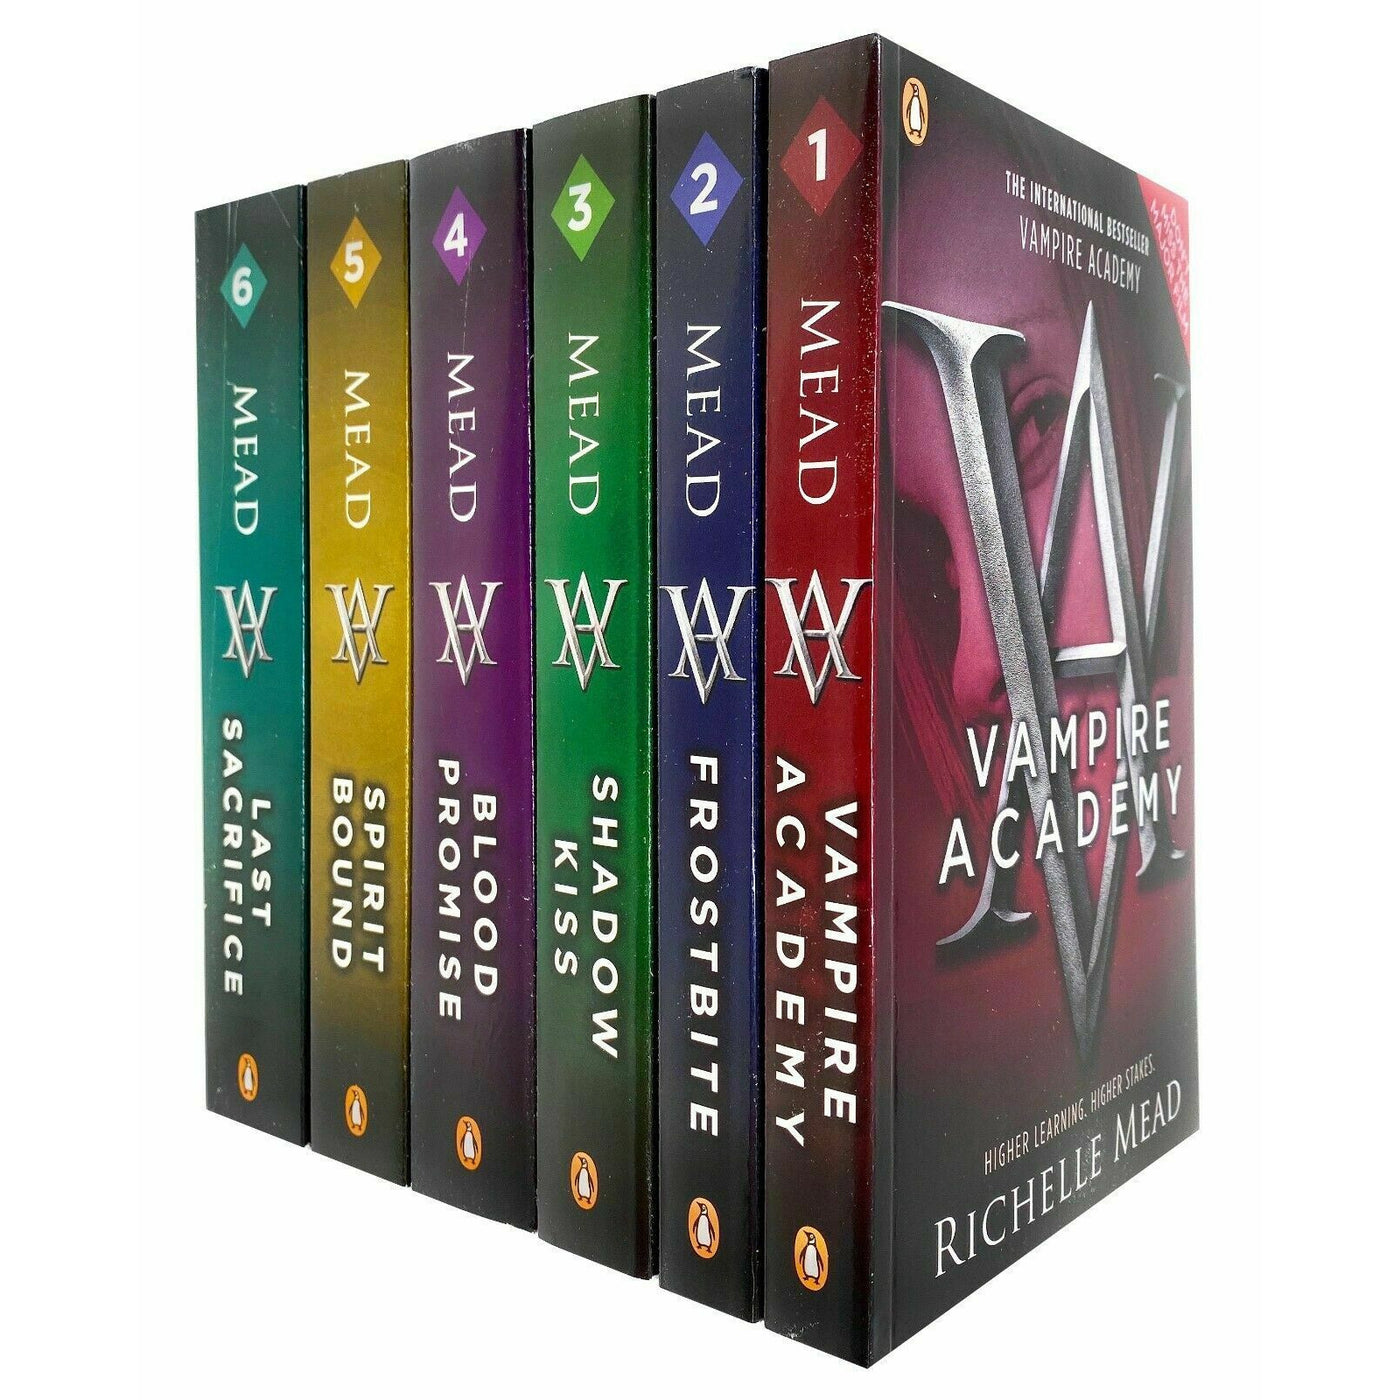 vampire academy complete series books 1 6 richelle mead